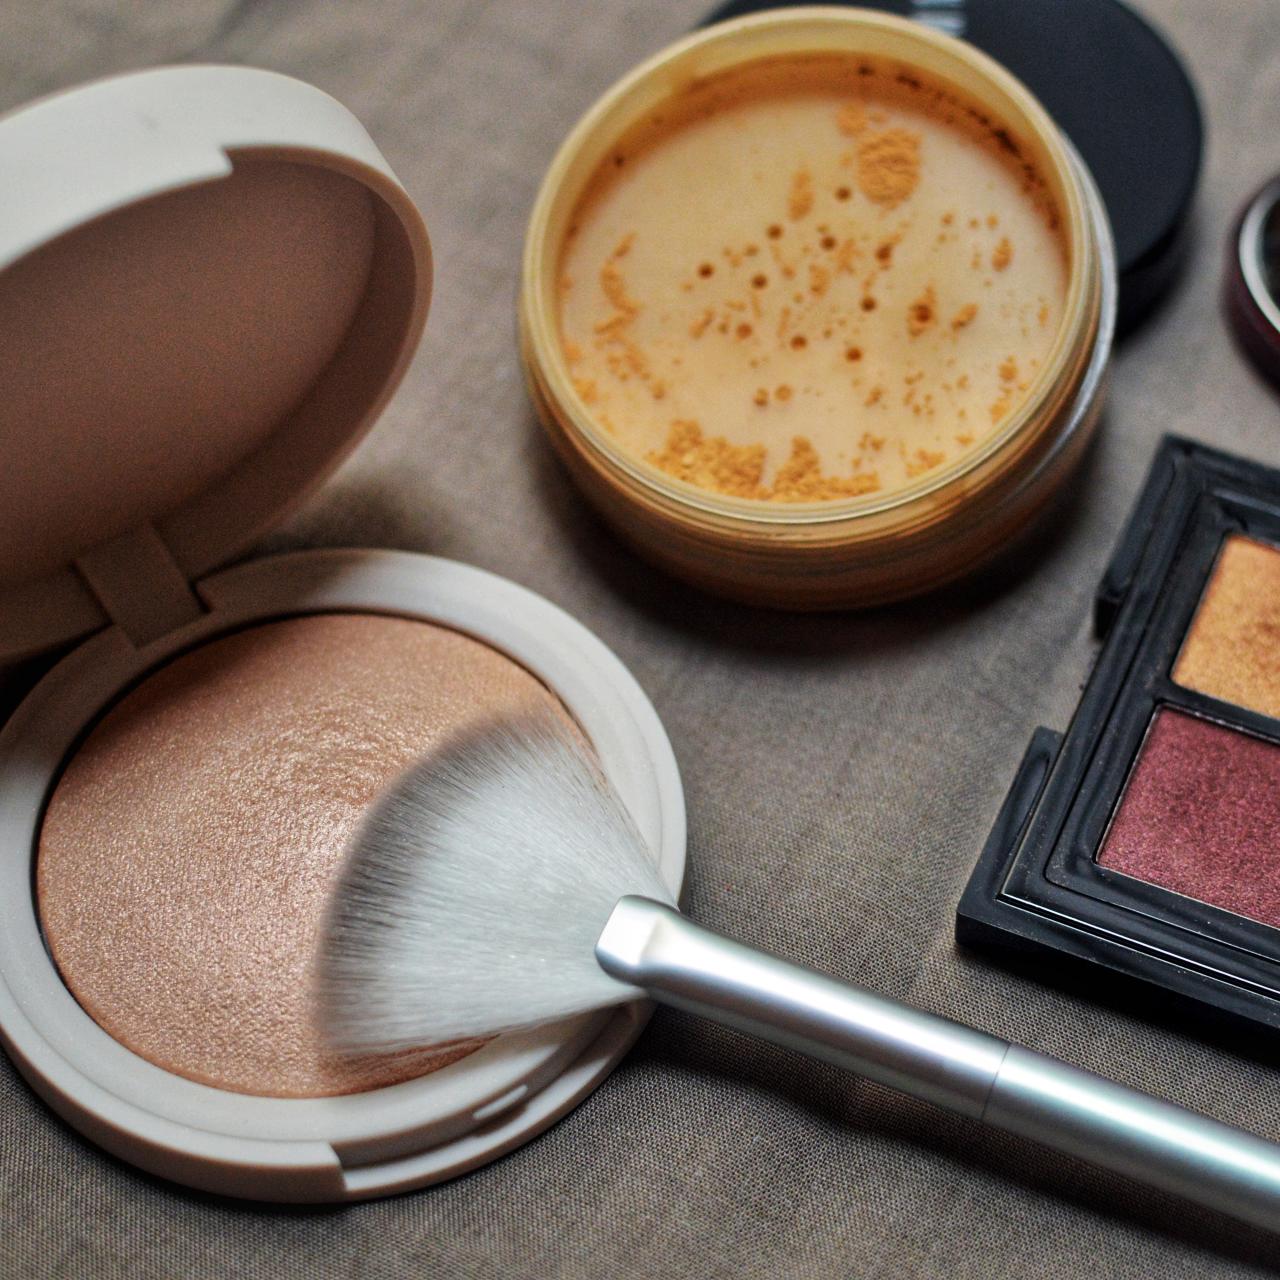 We Found A Chanel Cream Bronzer Dupe That's Less Than $15